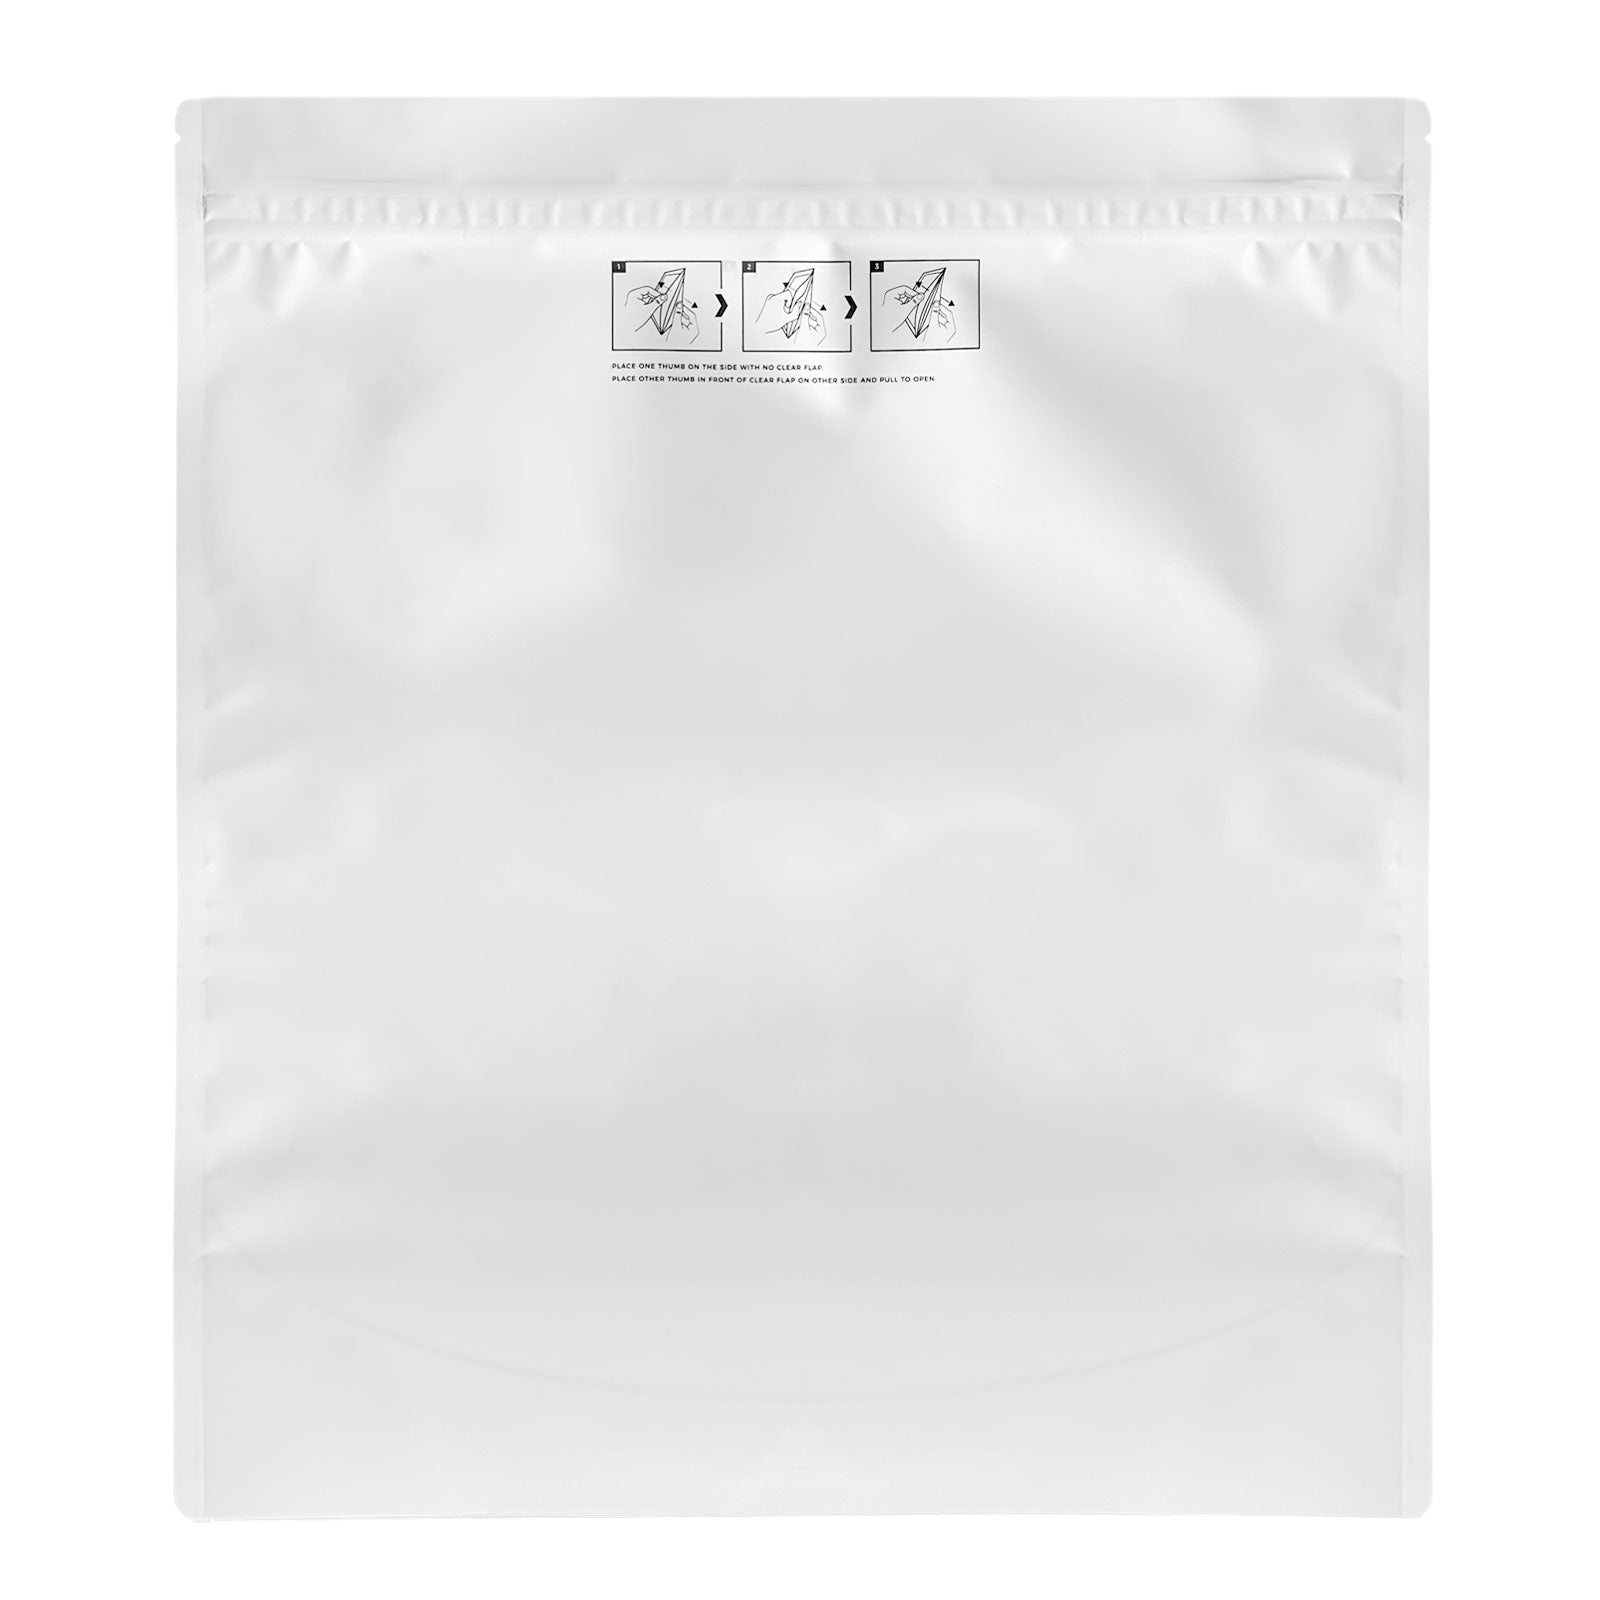 14.6"x16.4"+4" Extra Large Child Resistant 1-3 lbs Exit Bags All White - 200 Count